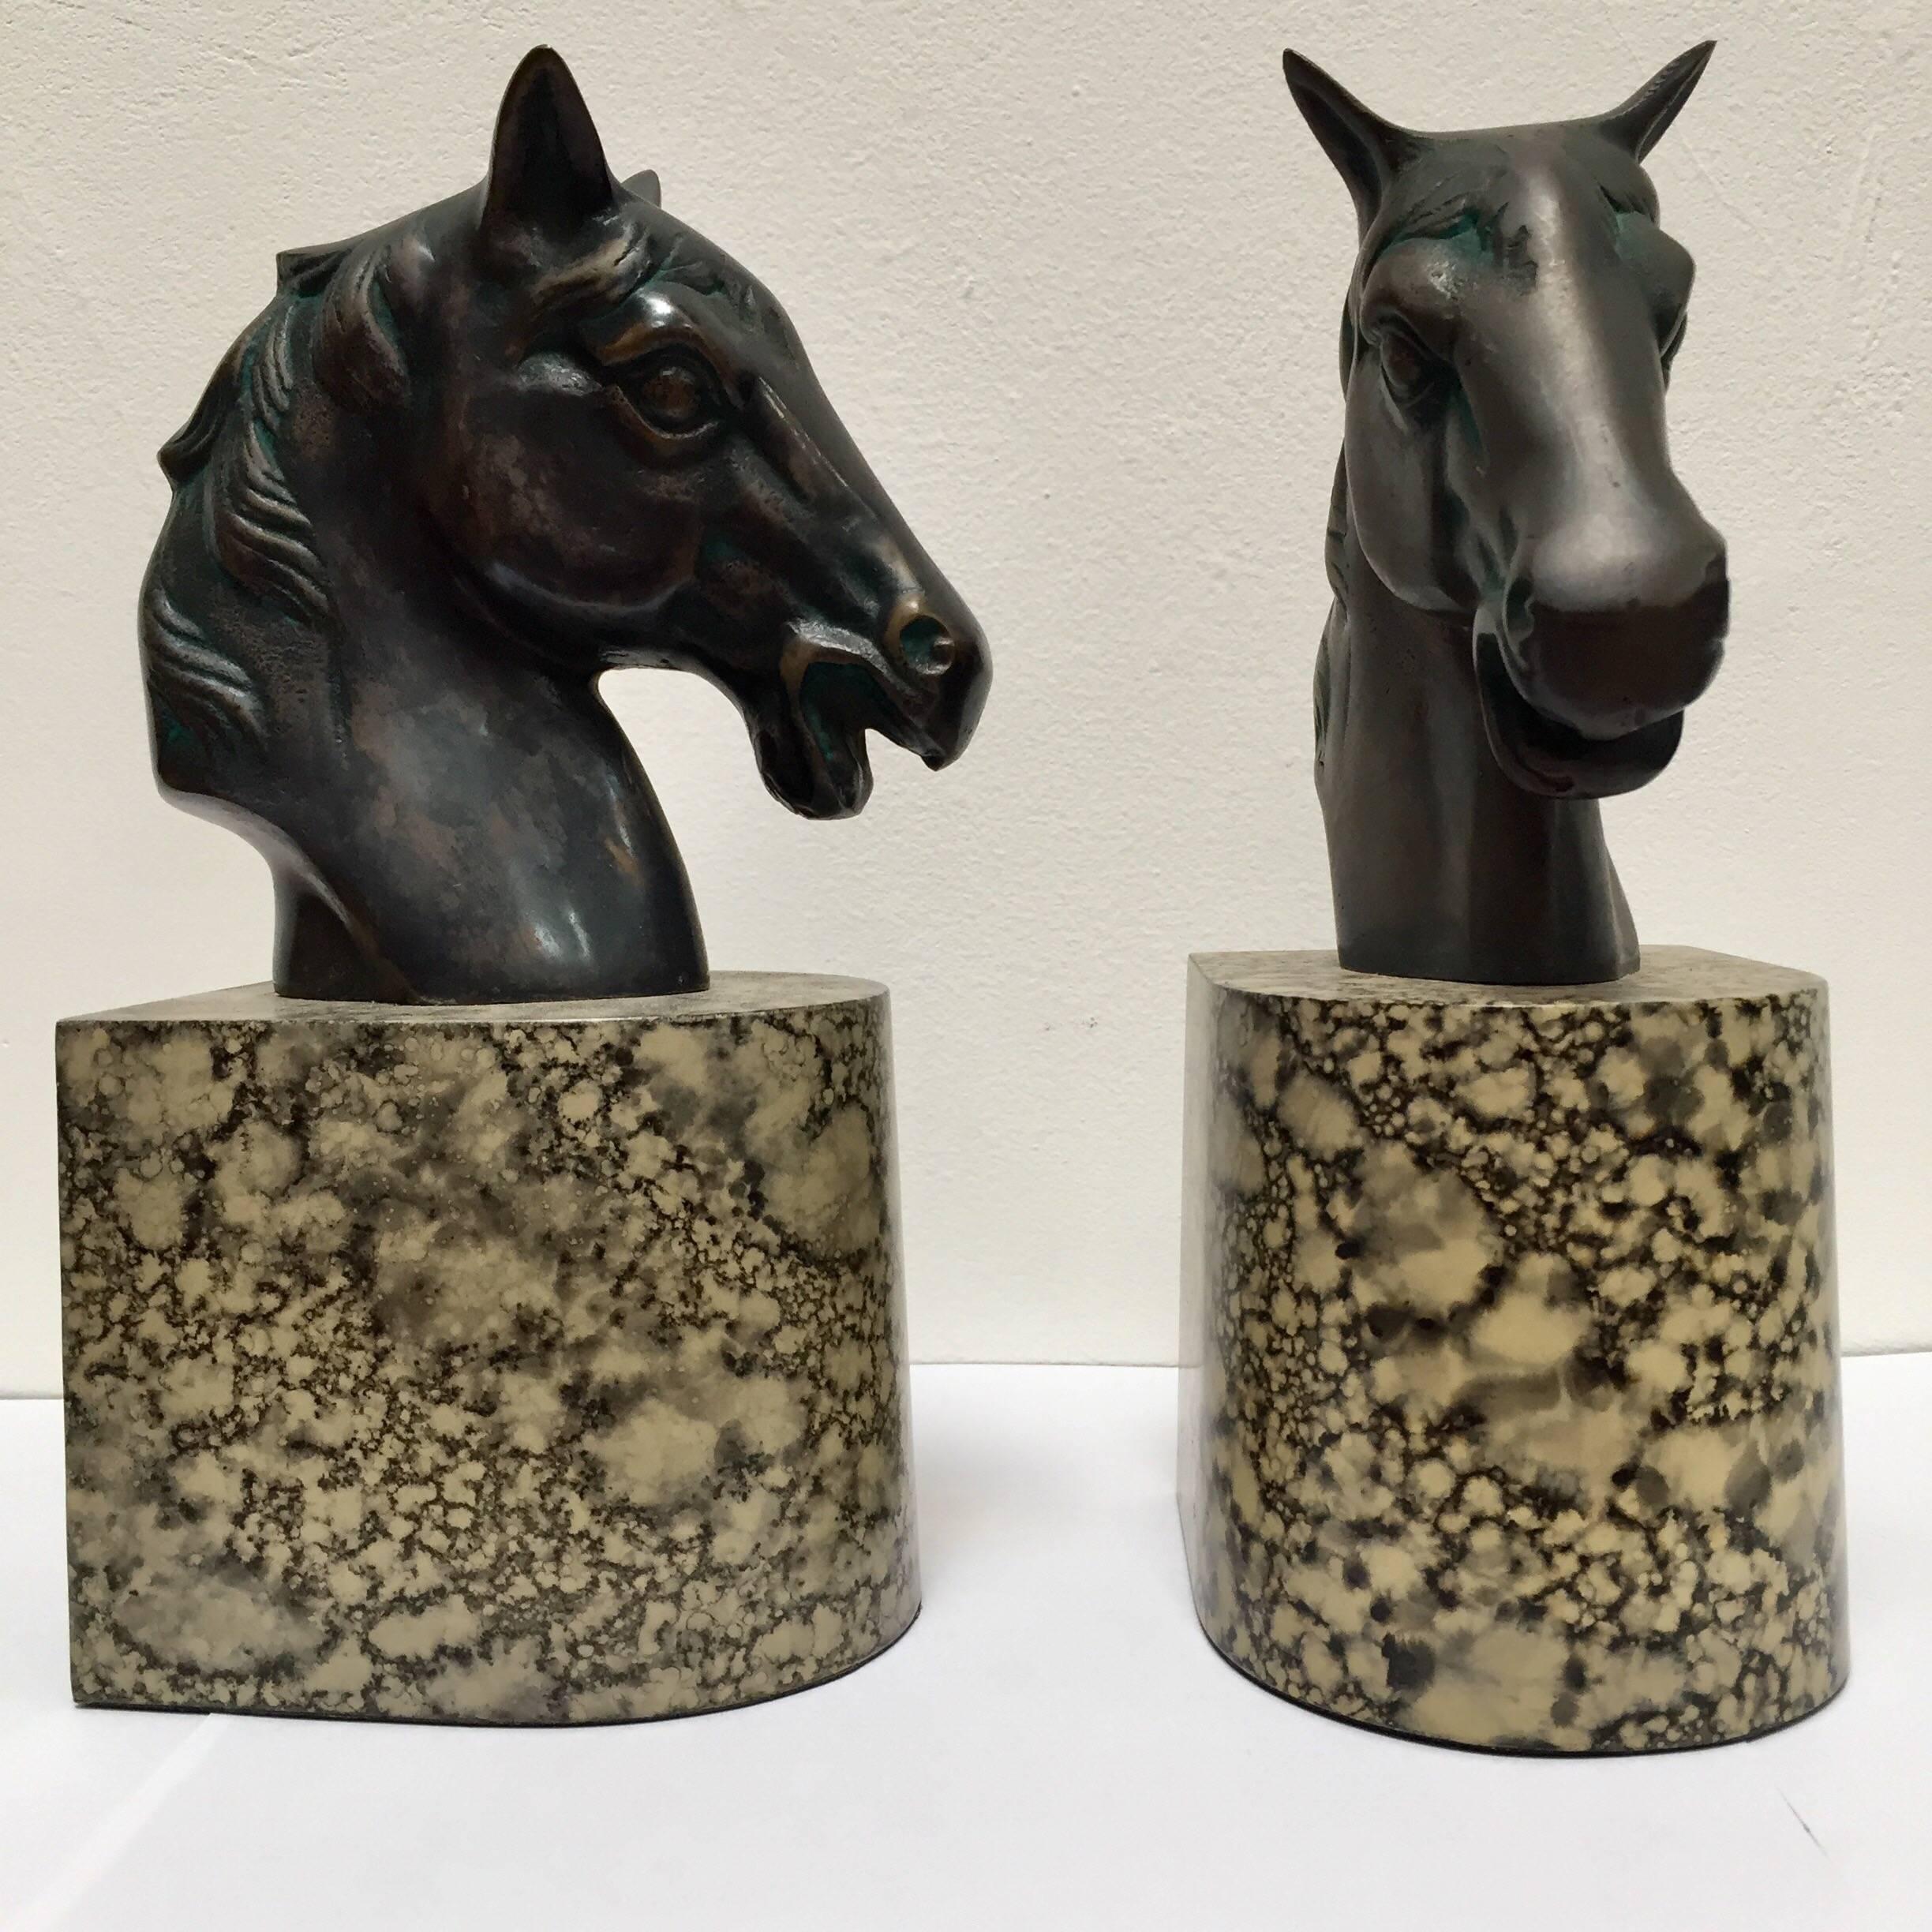 Italian Cast Bronze Sculptures of Black Horses Bust Bookends on Stand 